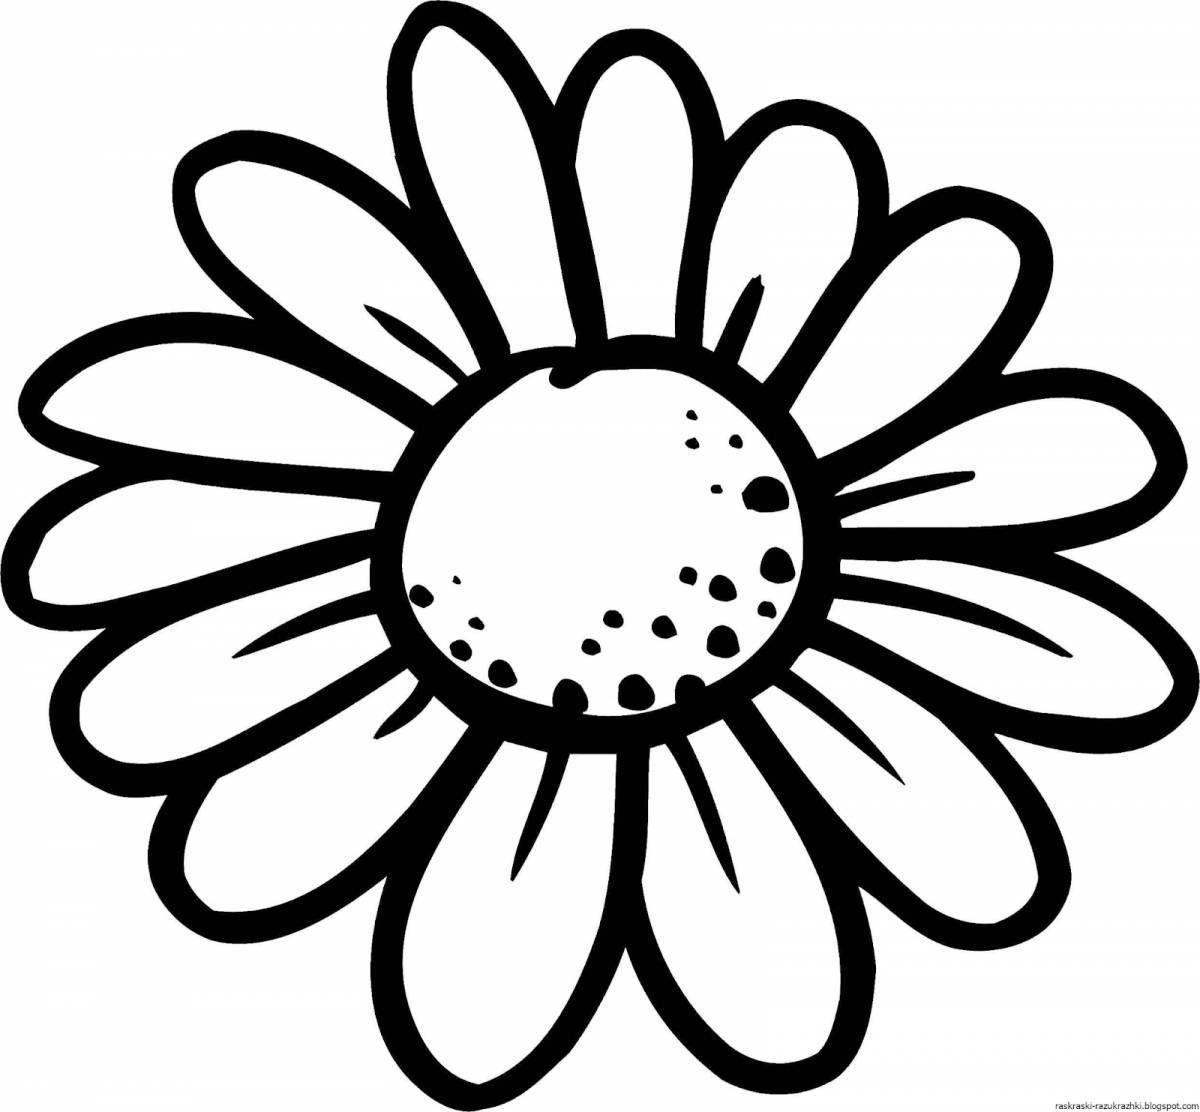 Coloring page festive chamomile flower